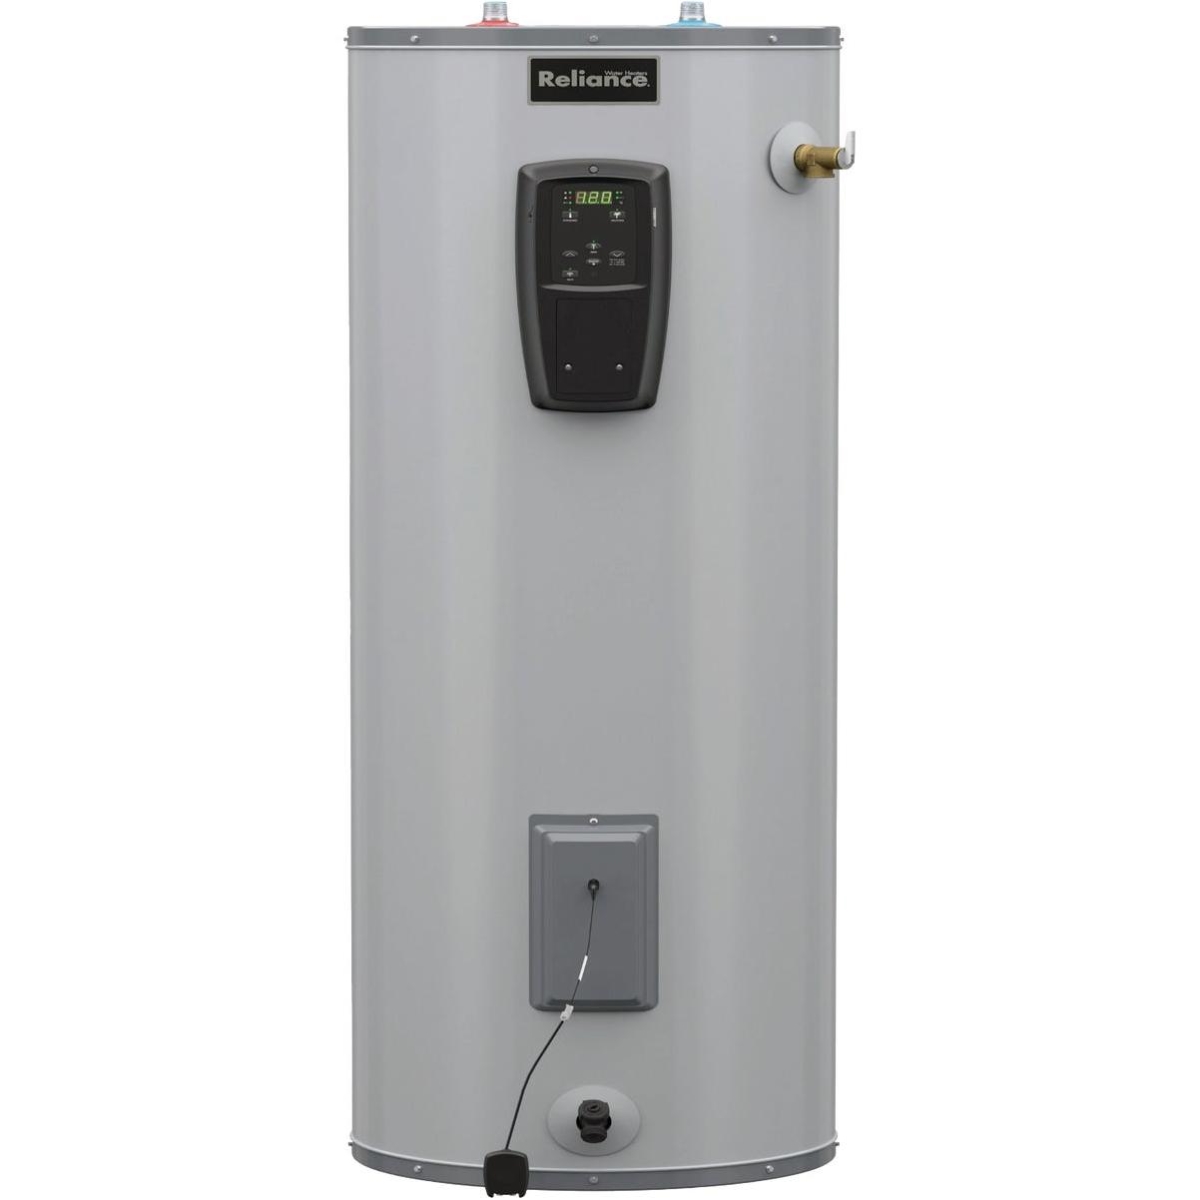 Reliance Water Heater 115629 50 gal Tall Water Heater with Leak Detection & Optional Shut Off Valve